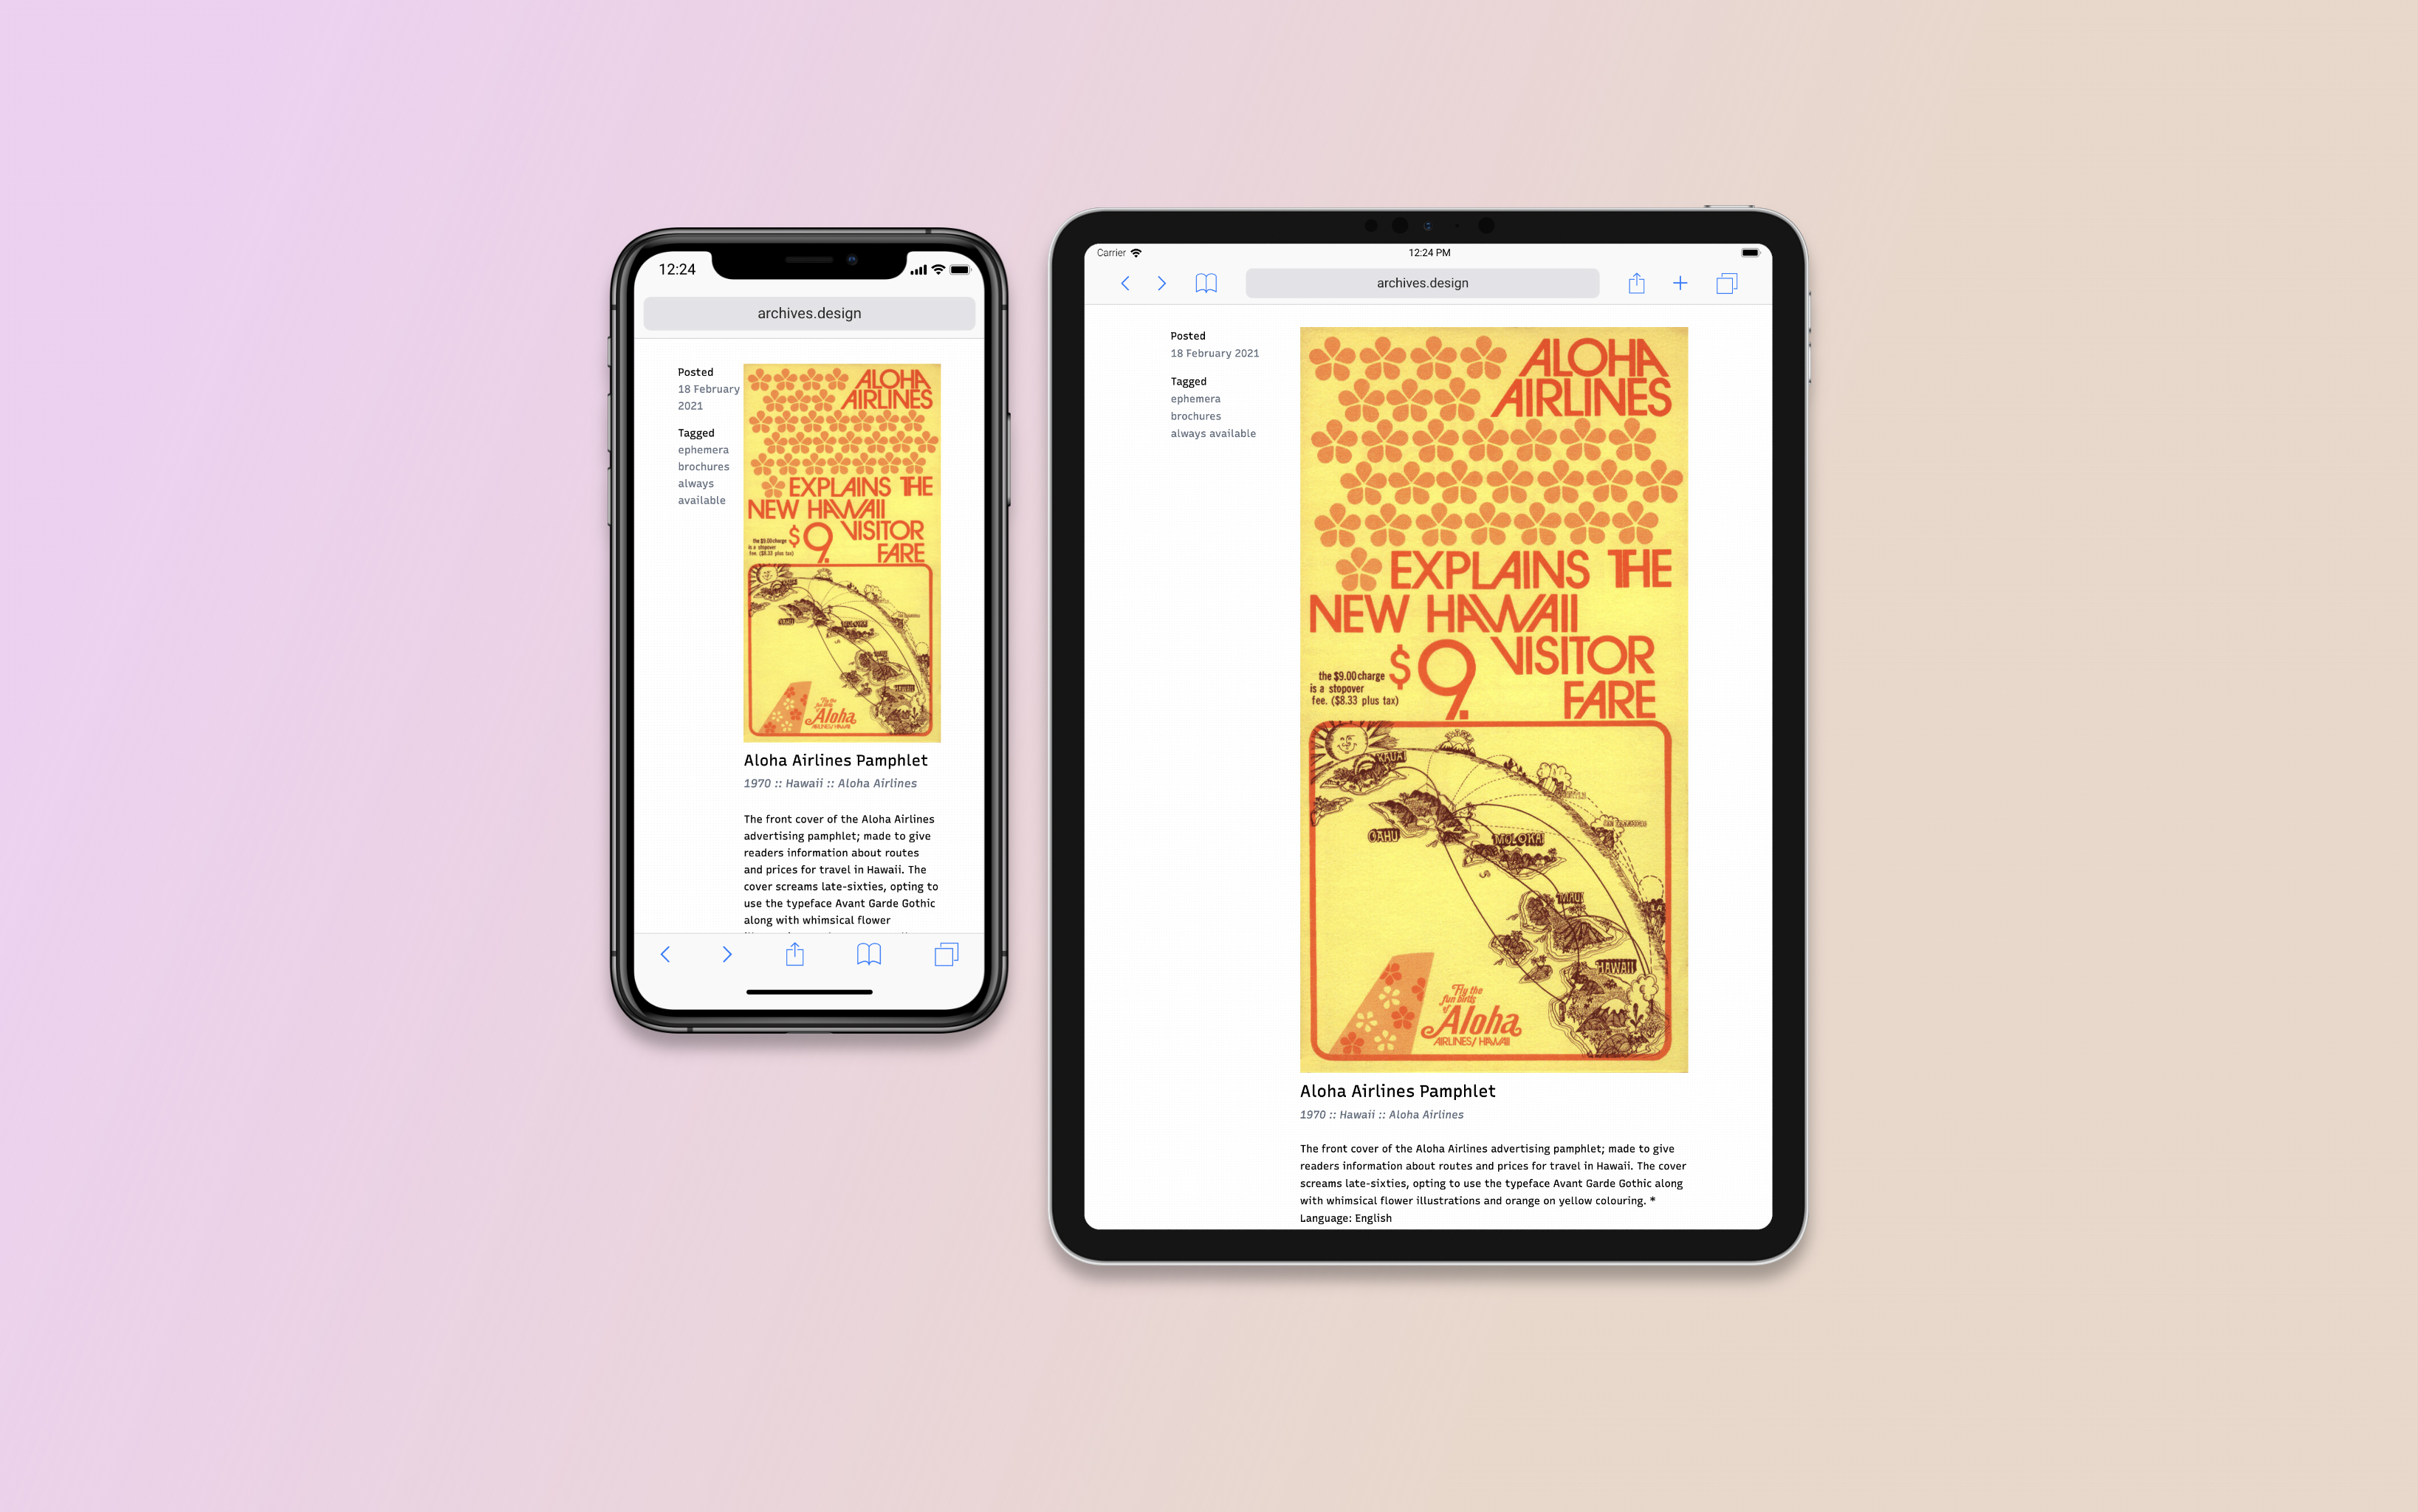 A photo of an item page from archives.design displayed on an iPhone (left) and iPad (right).